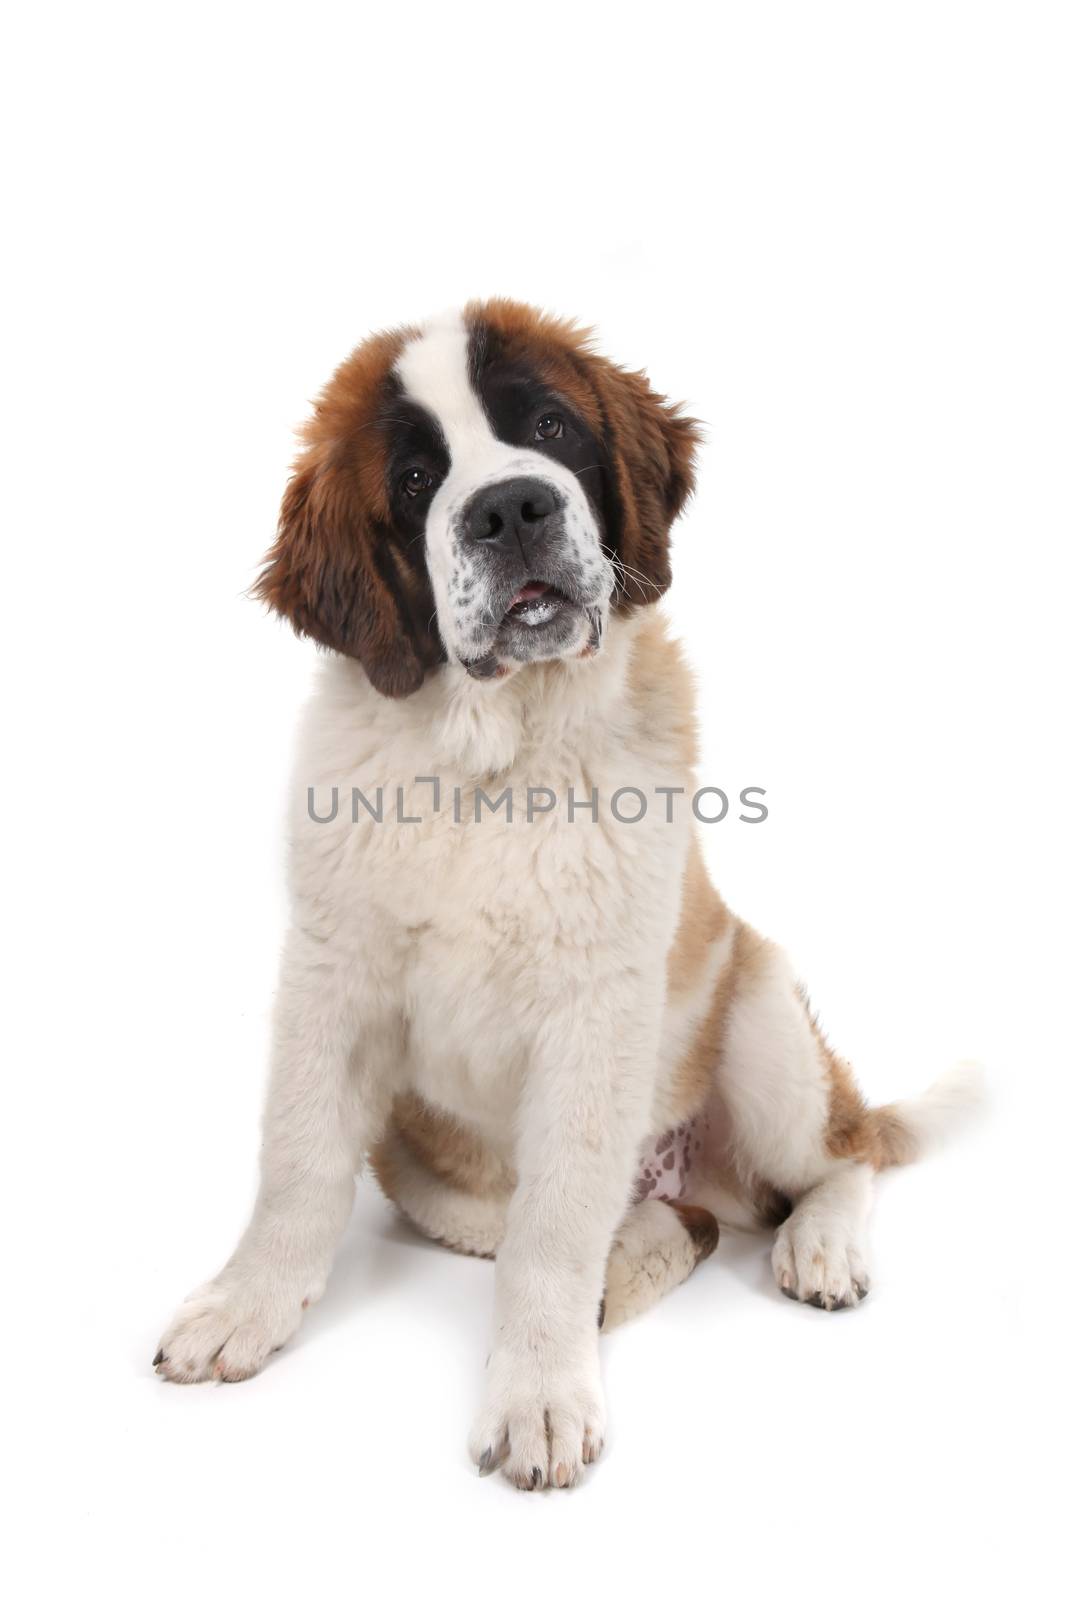 Curious Saint Bernard Puppy Sitting Down With Head Tilted in Studio Shot